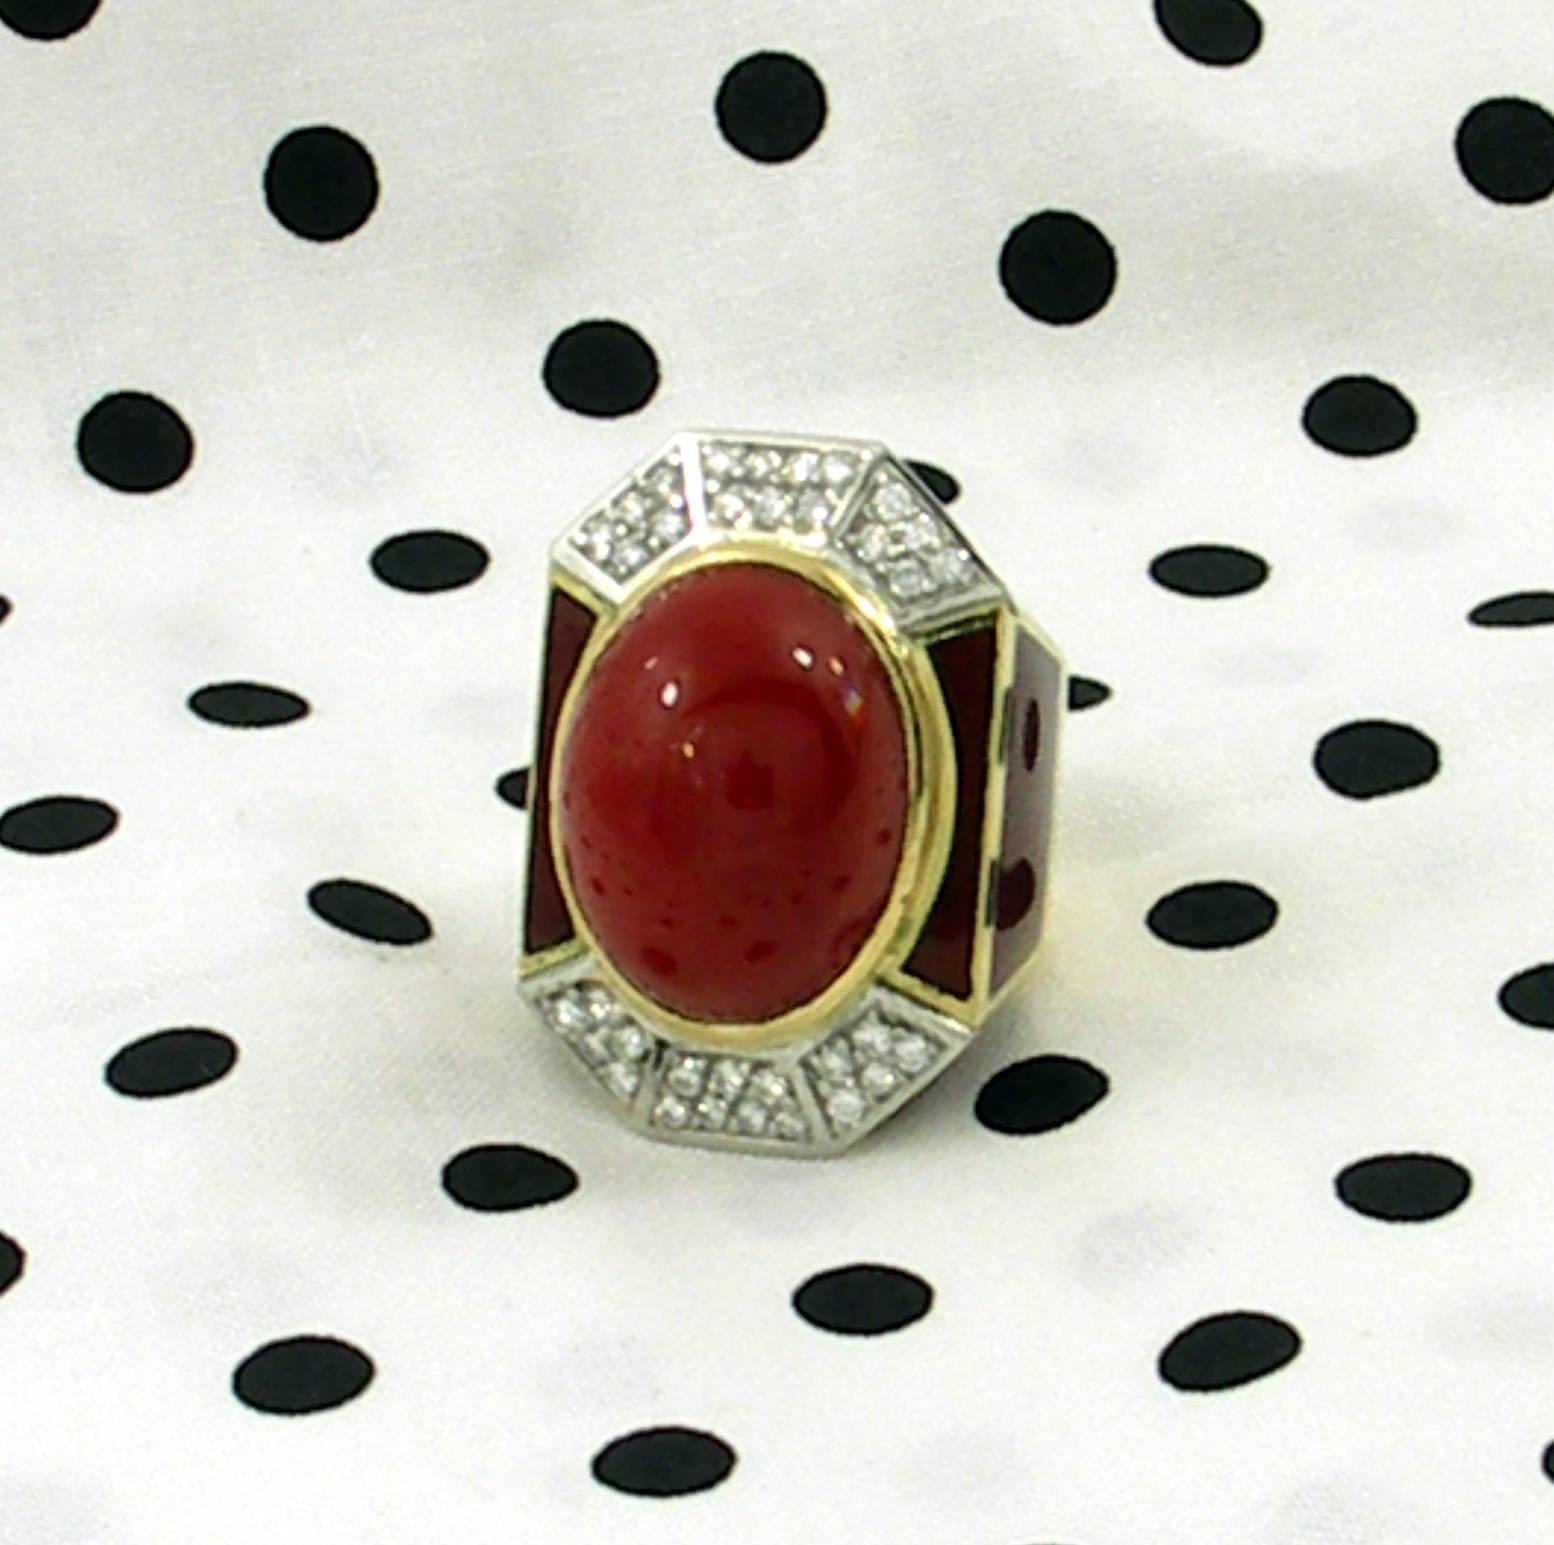 An 18K yellow gold, geometric design ring, set with 34 round brilliant cut diamonds, weighing 1ct total approximate weight, of overall G color and VS1 clarity. At the center of the ring is an oval cabochon cut ox blood coral, measuring 24mm X 18mm,